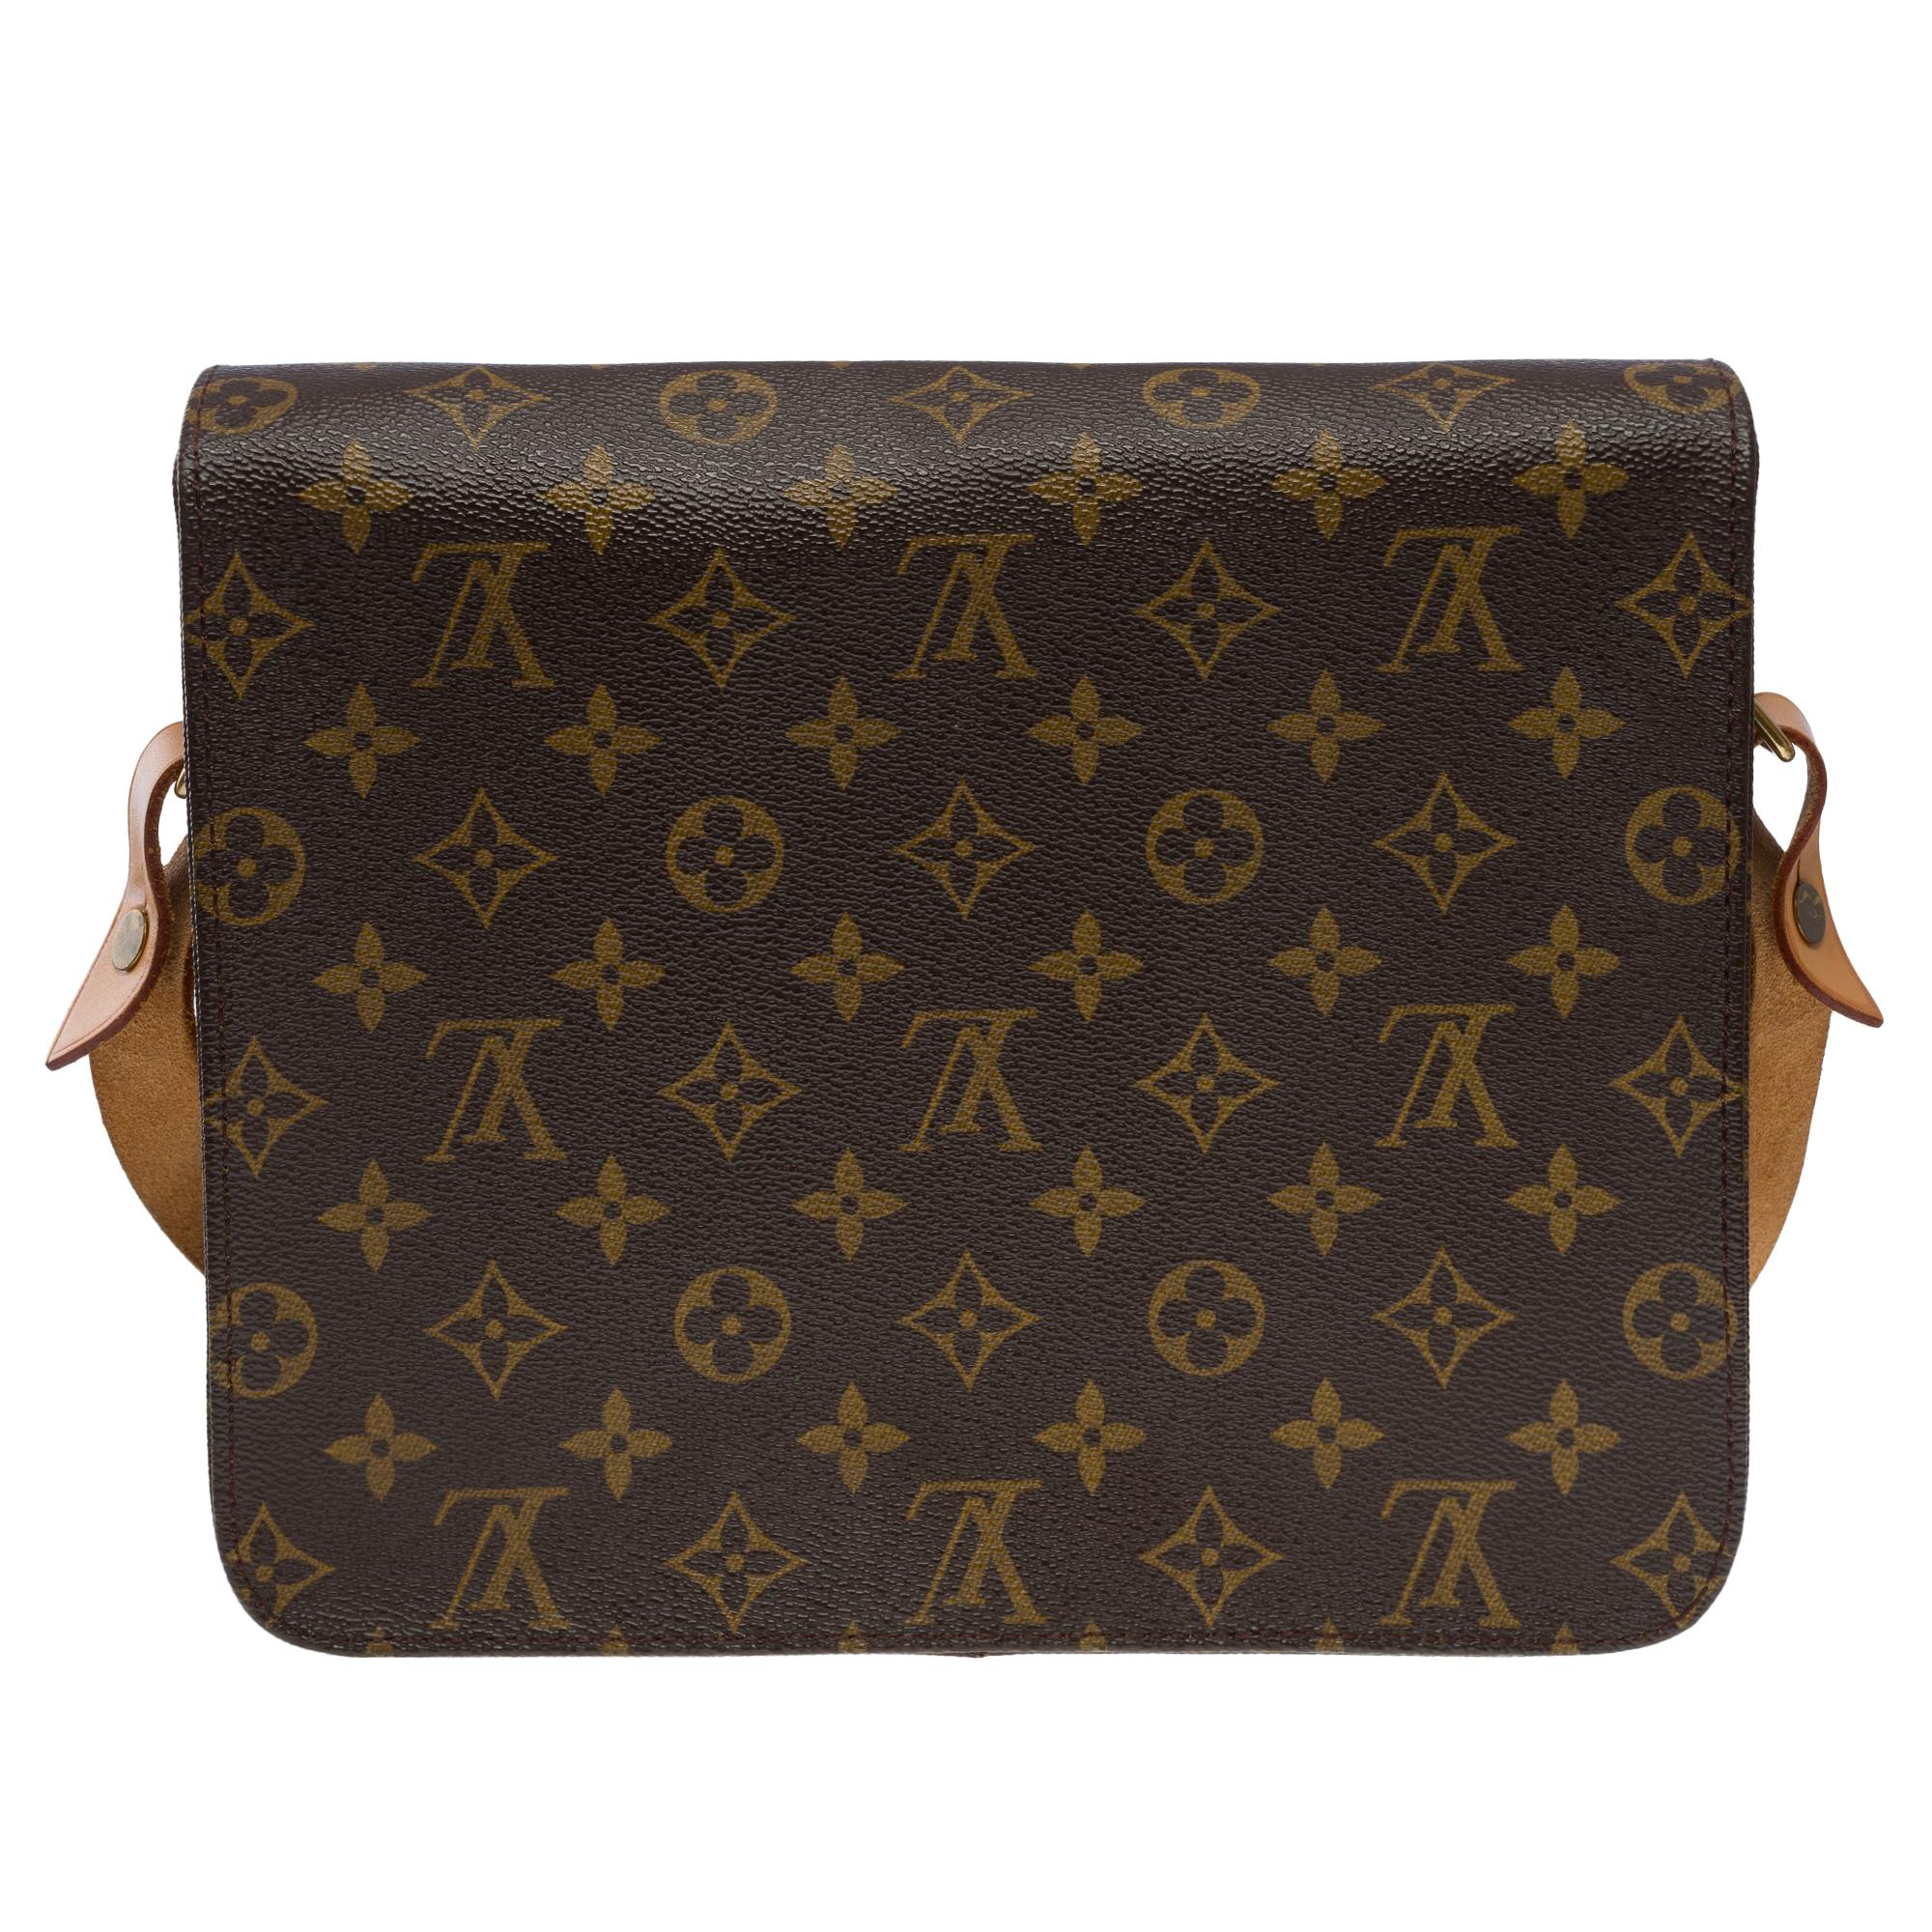 The must-have Louis Vuitton Cartouchière GM shoulder bag in brown monogram canvas and natural leather,   gold metal trim, an adjustable shoulder strap in natural leather for a shoulder or crossbody carry

Pin buckle closure on flap
Brown leather